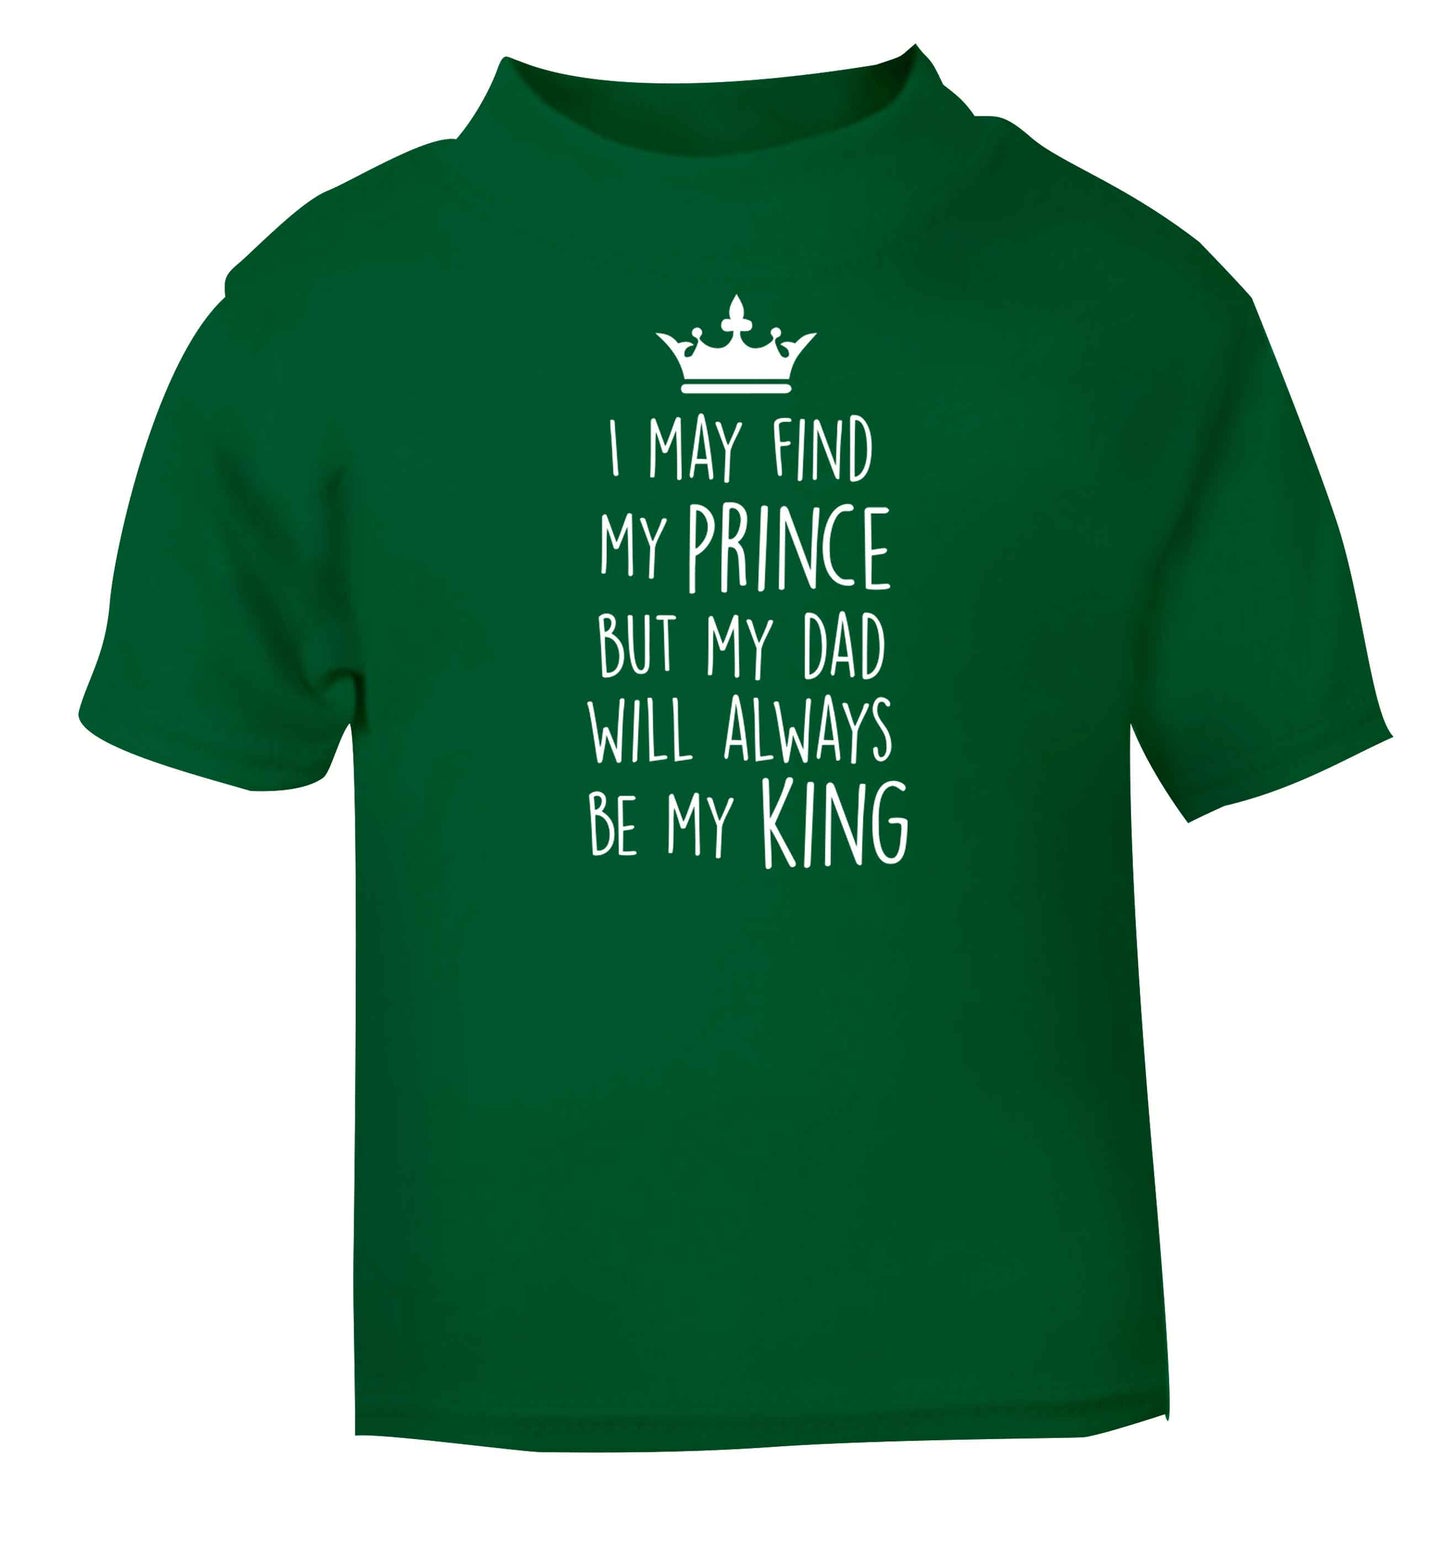 I may find my prince but my dad will always be my king green baby toddler Tshirt 2 Years